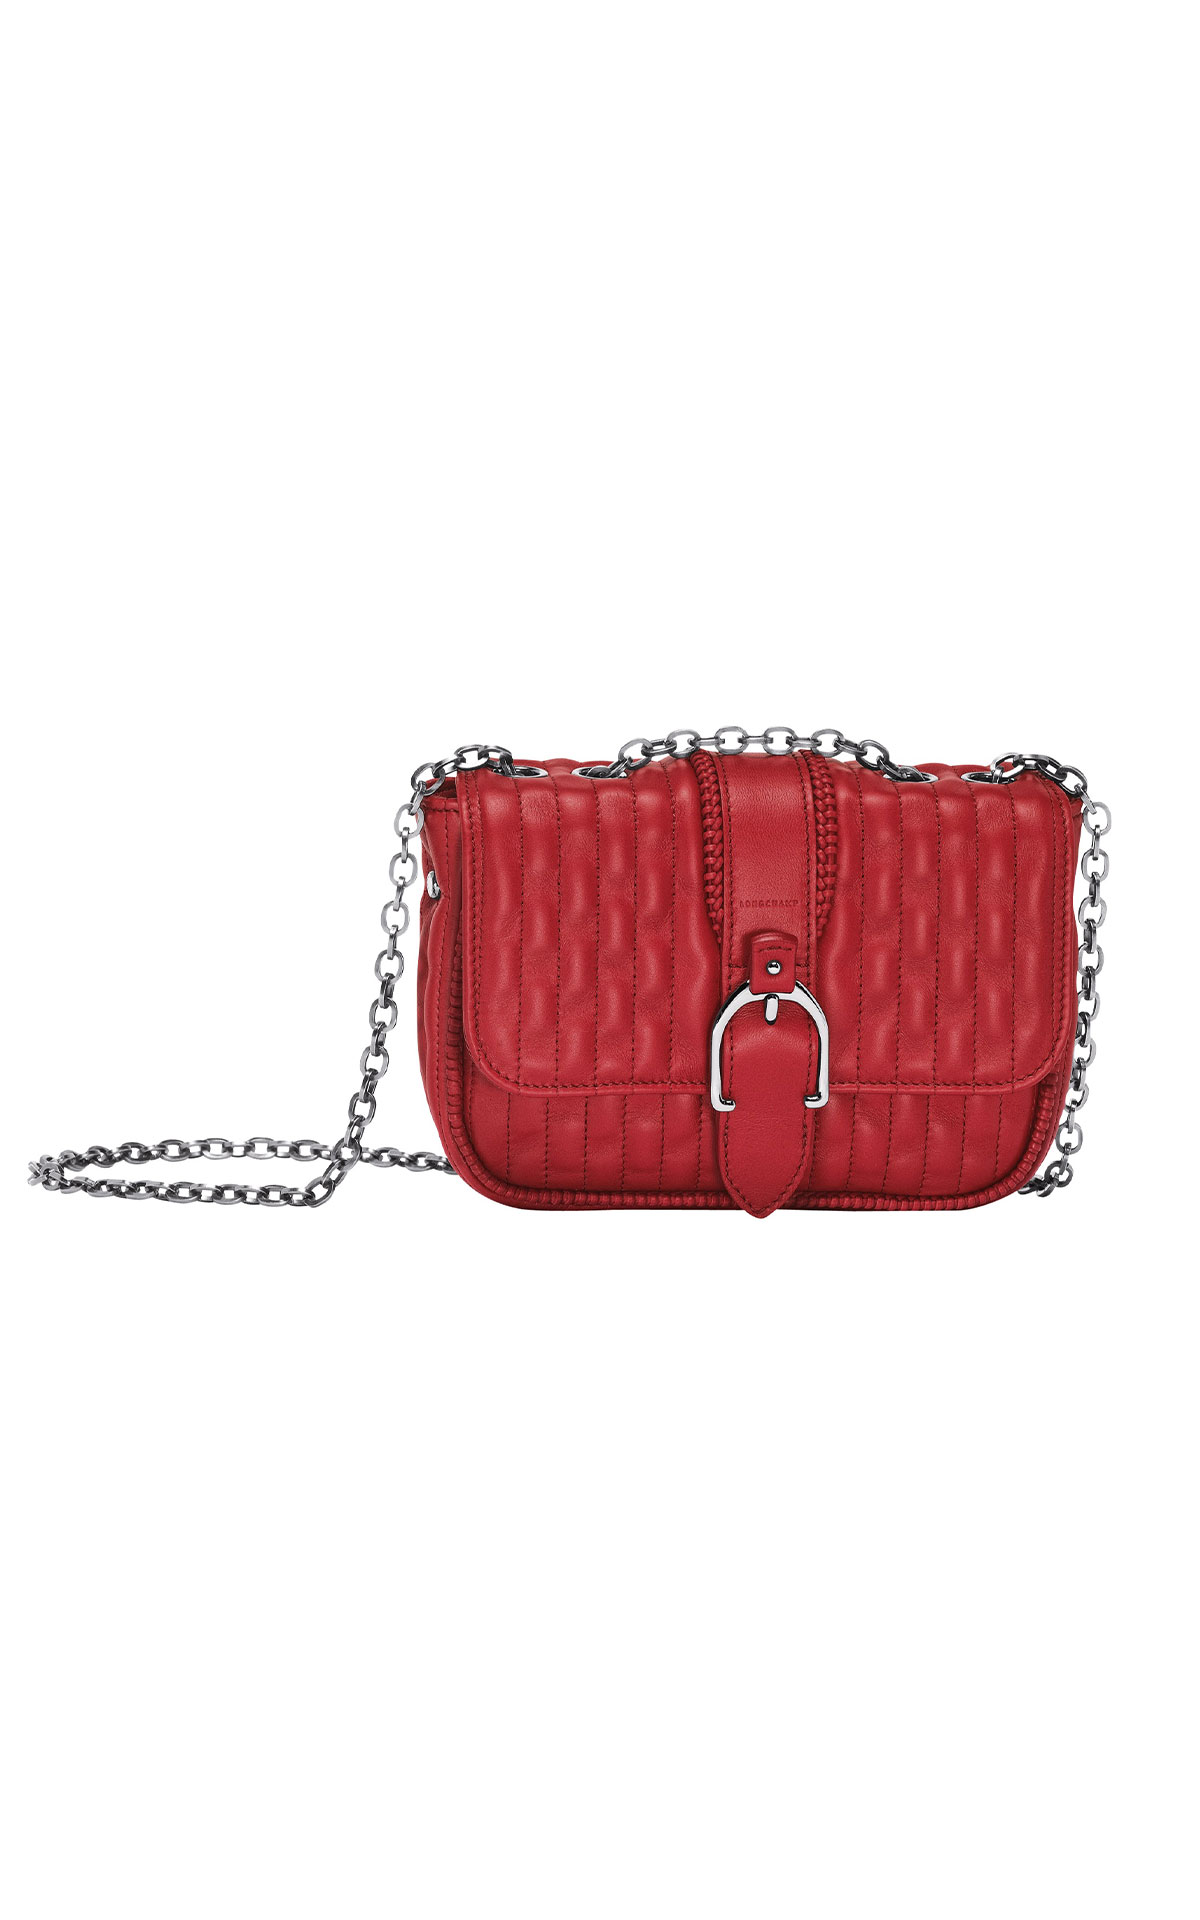 Longchamp Amazone matelass red handbag with chain shoulder strap from Bicester Village